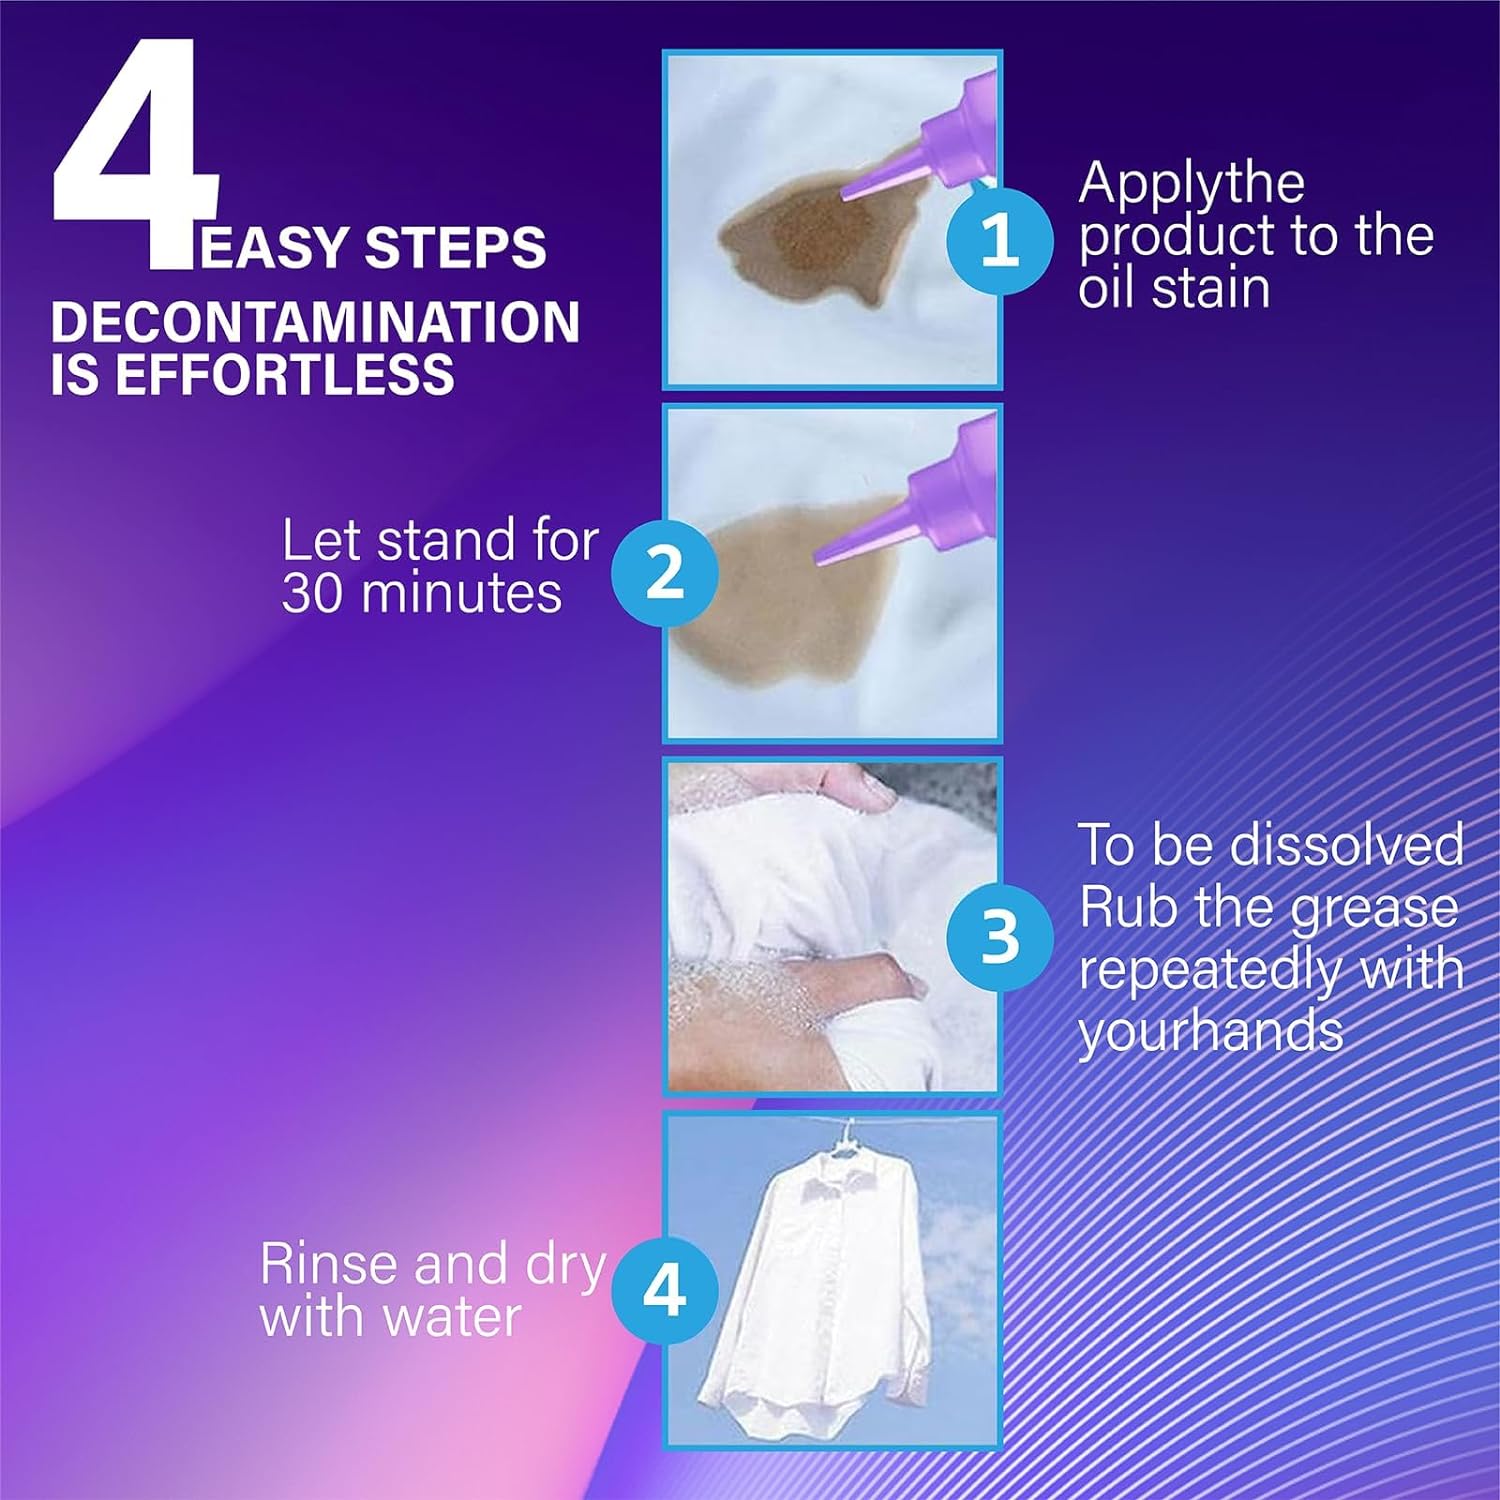 Active Enzyme Laundry Stain Remover, BGYVNU Enzyme Clothing Stain Remover, Active Enzyme Stain Remover,Stubborn Stains Cleaner,Clothes Oil Stain Remover 120ML(3pcs) : Health & Household